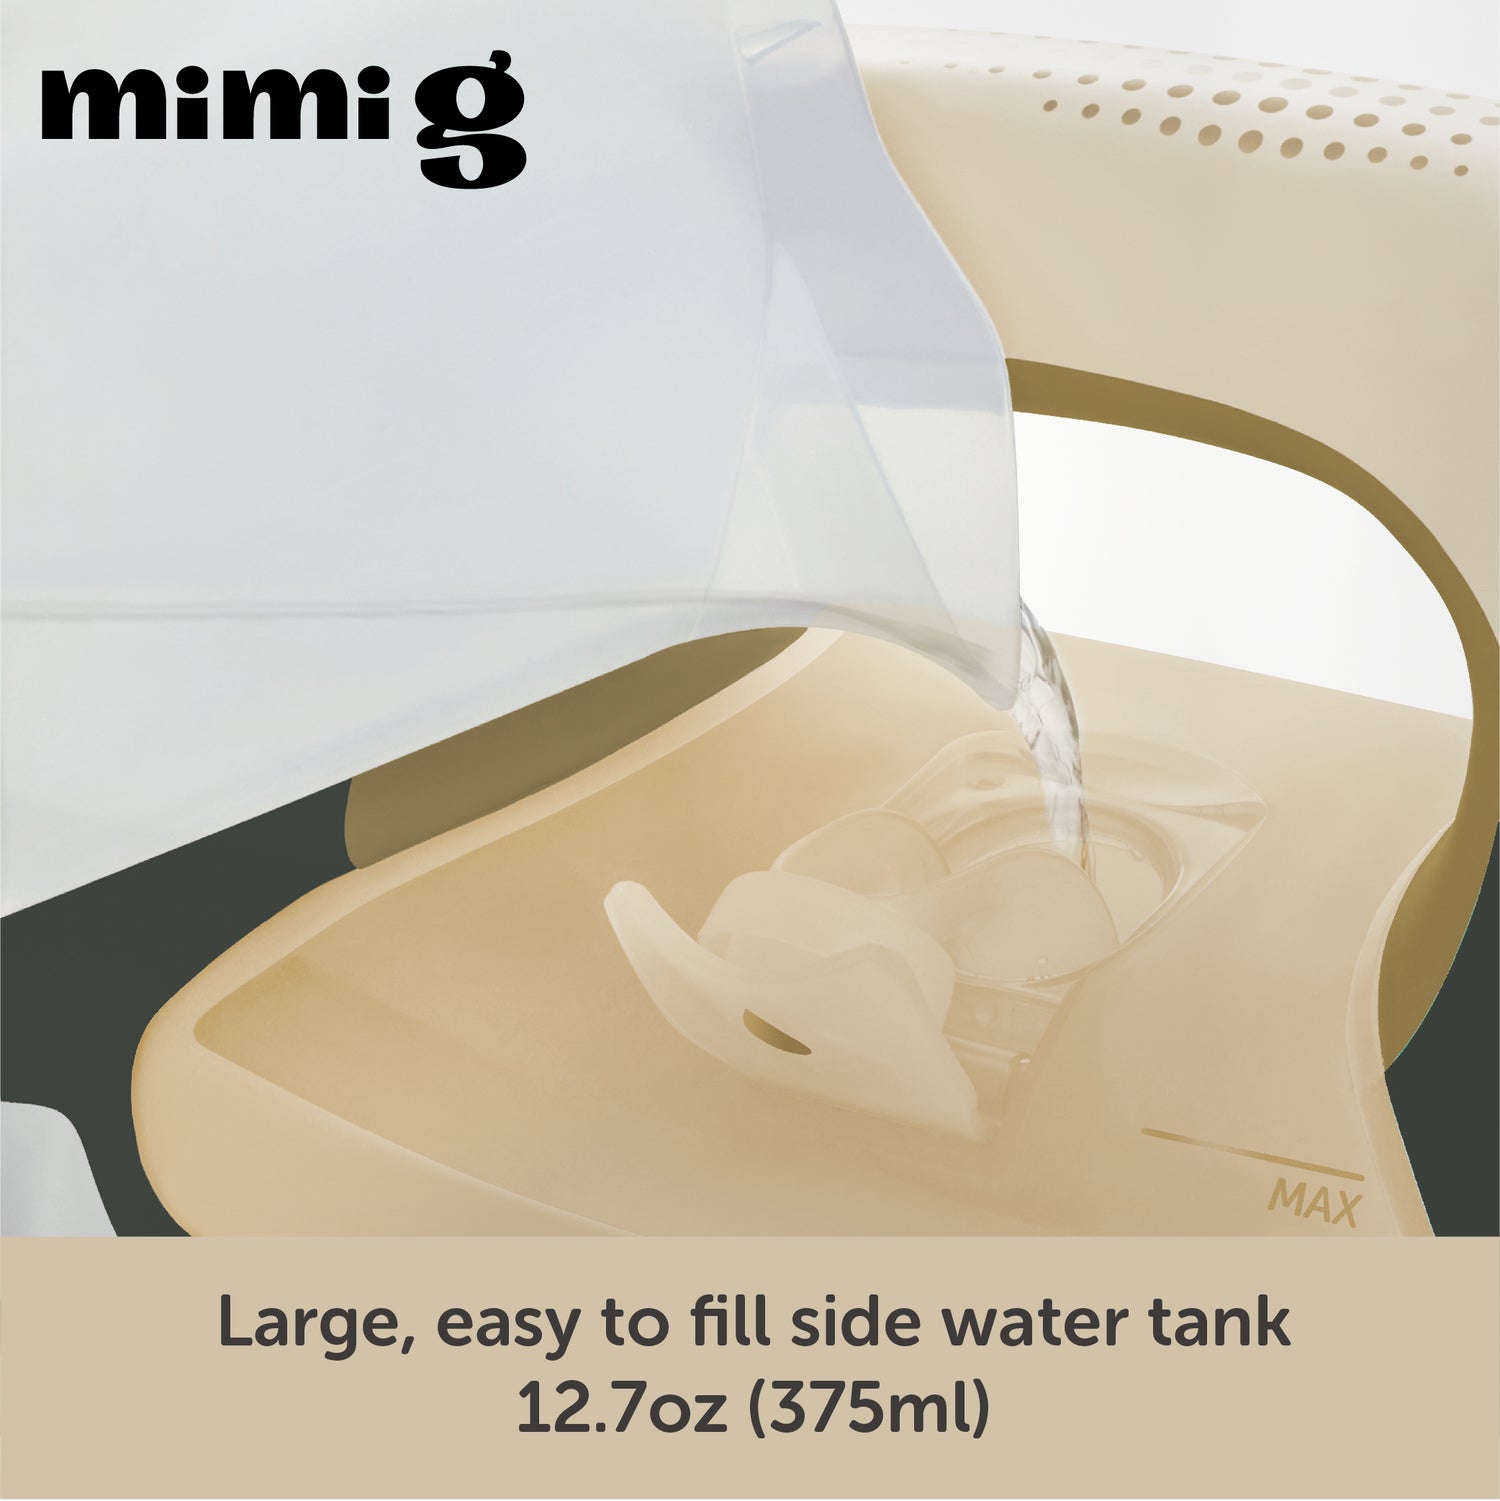 The Oliso Mimi G iron is easy to fill with thanks to the included water cup and convenient side port opening. 